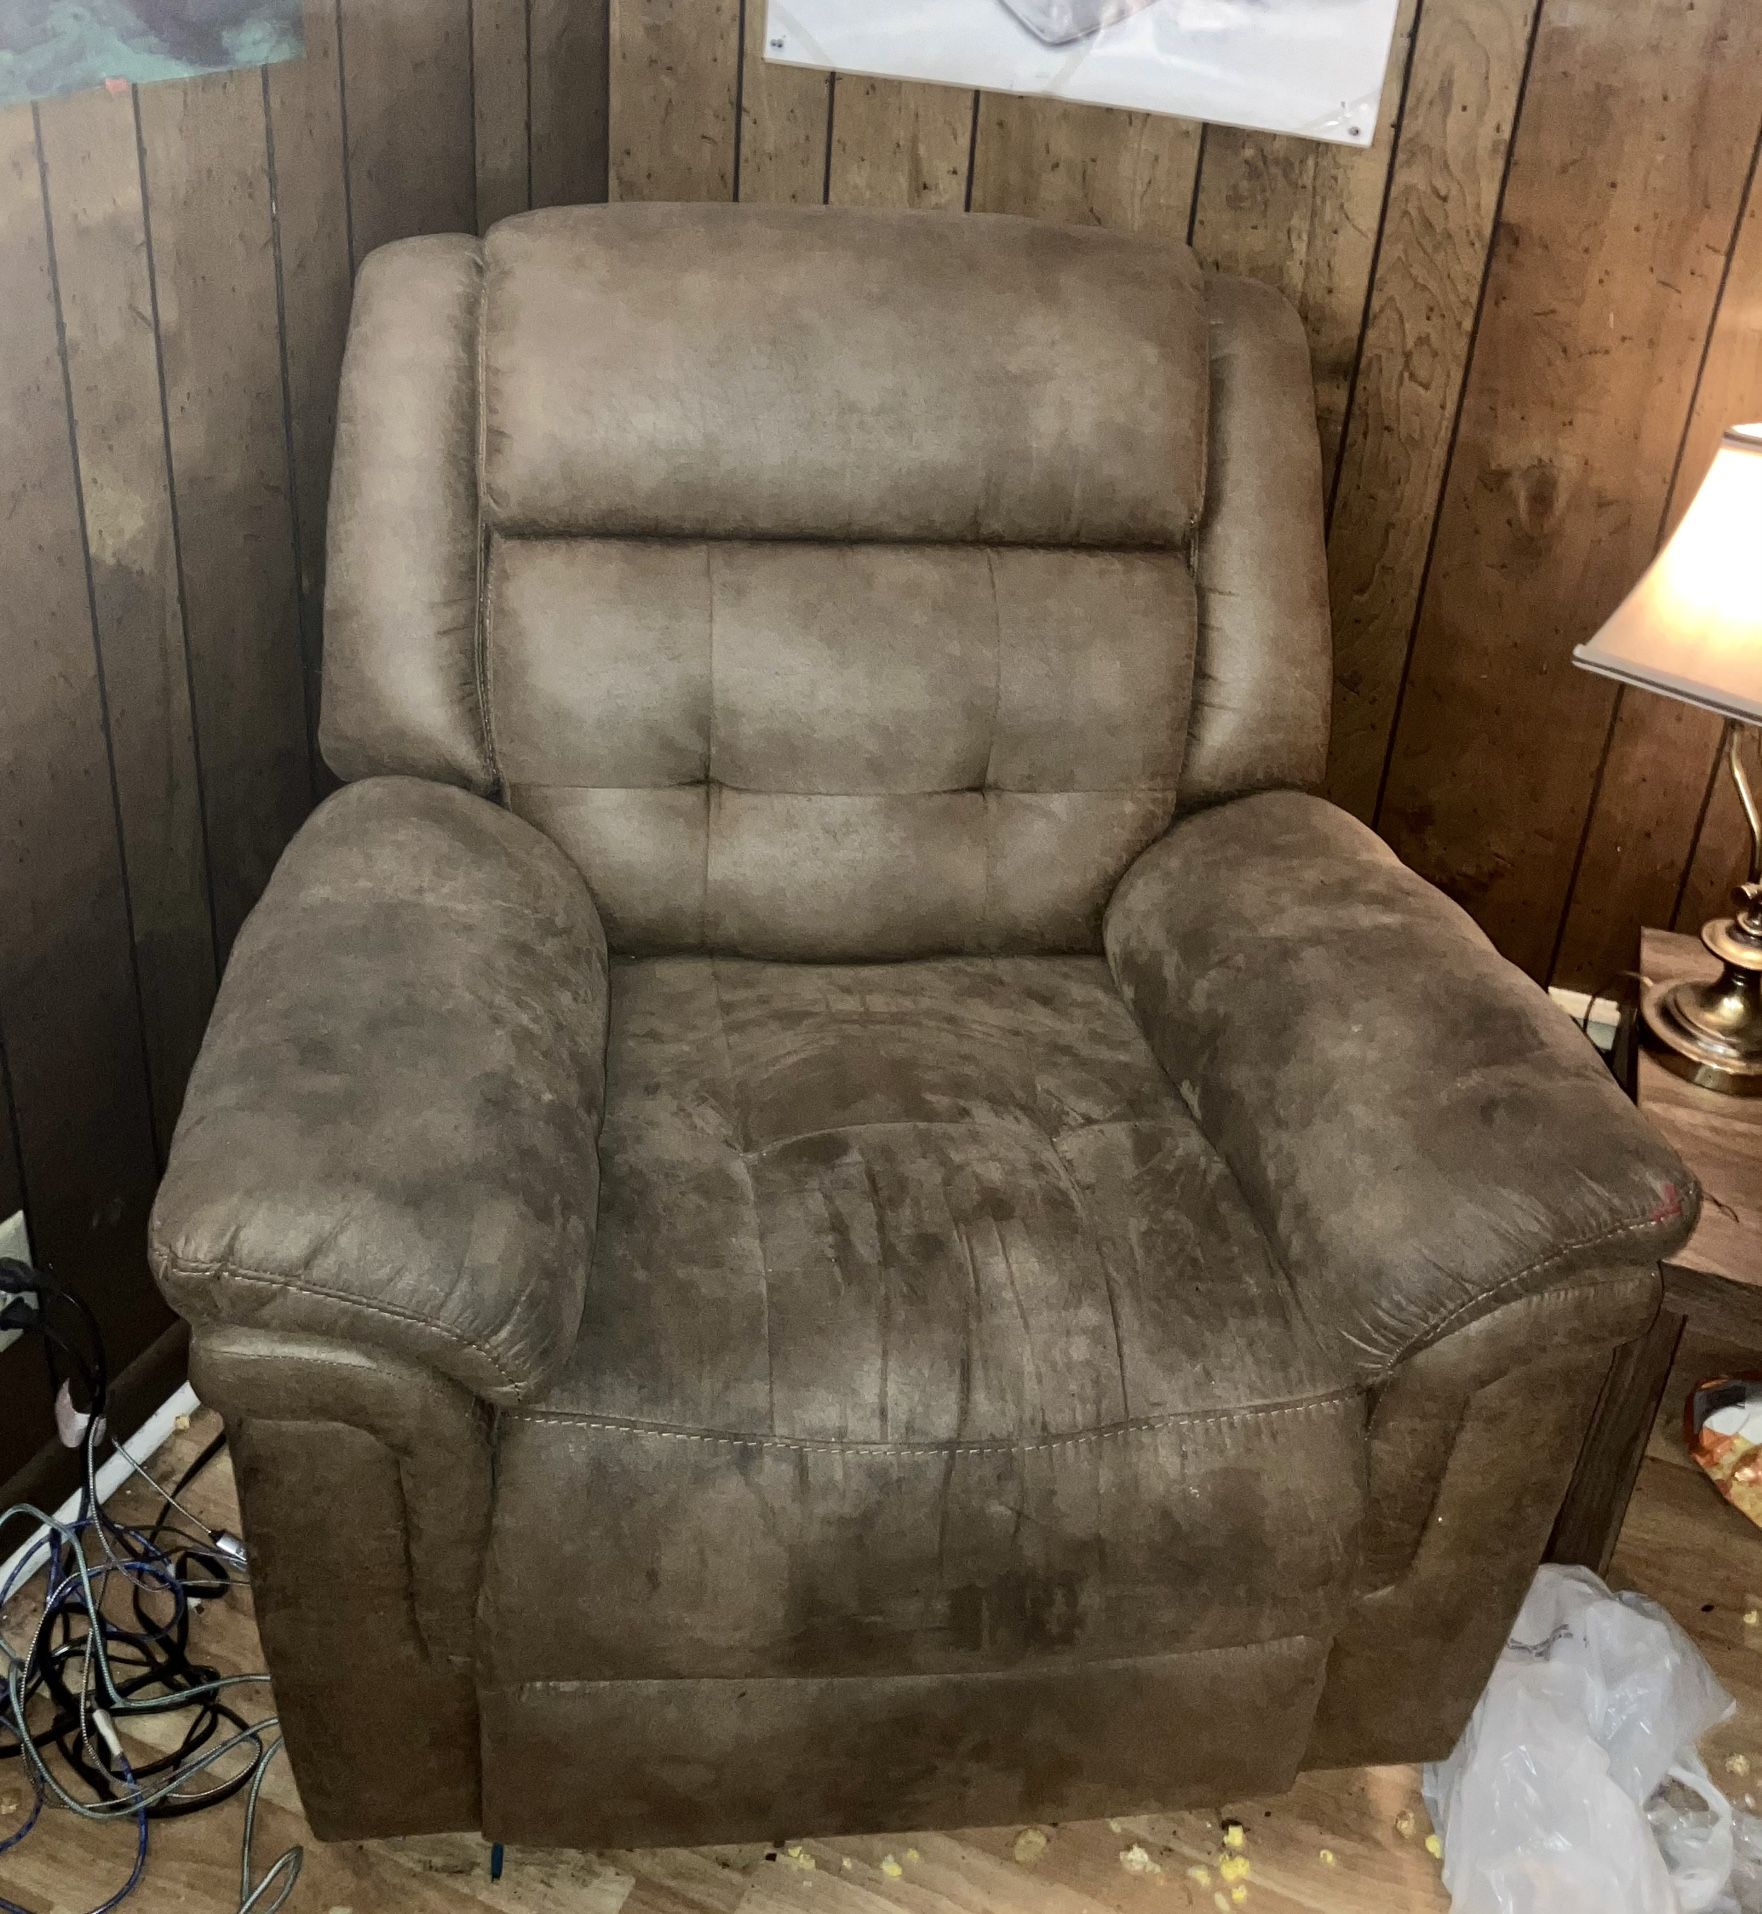 SUZHOU Light-Brown Suede Recliner w/ Outlets